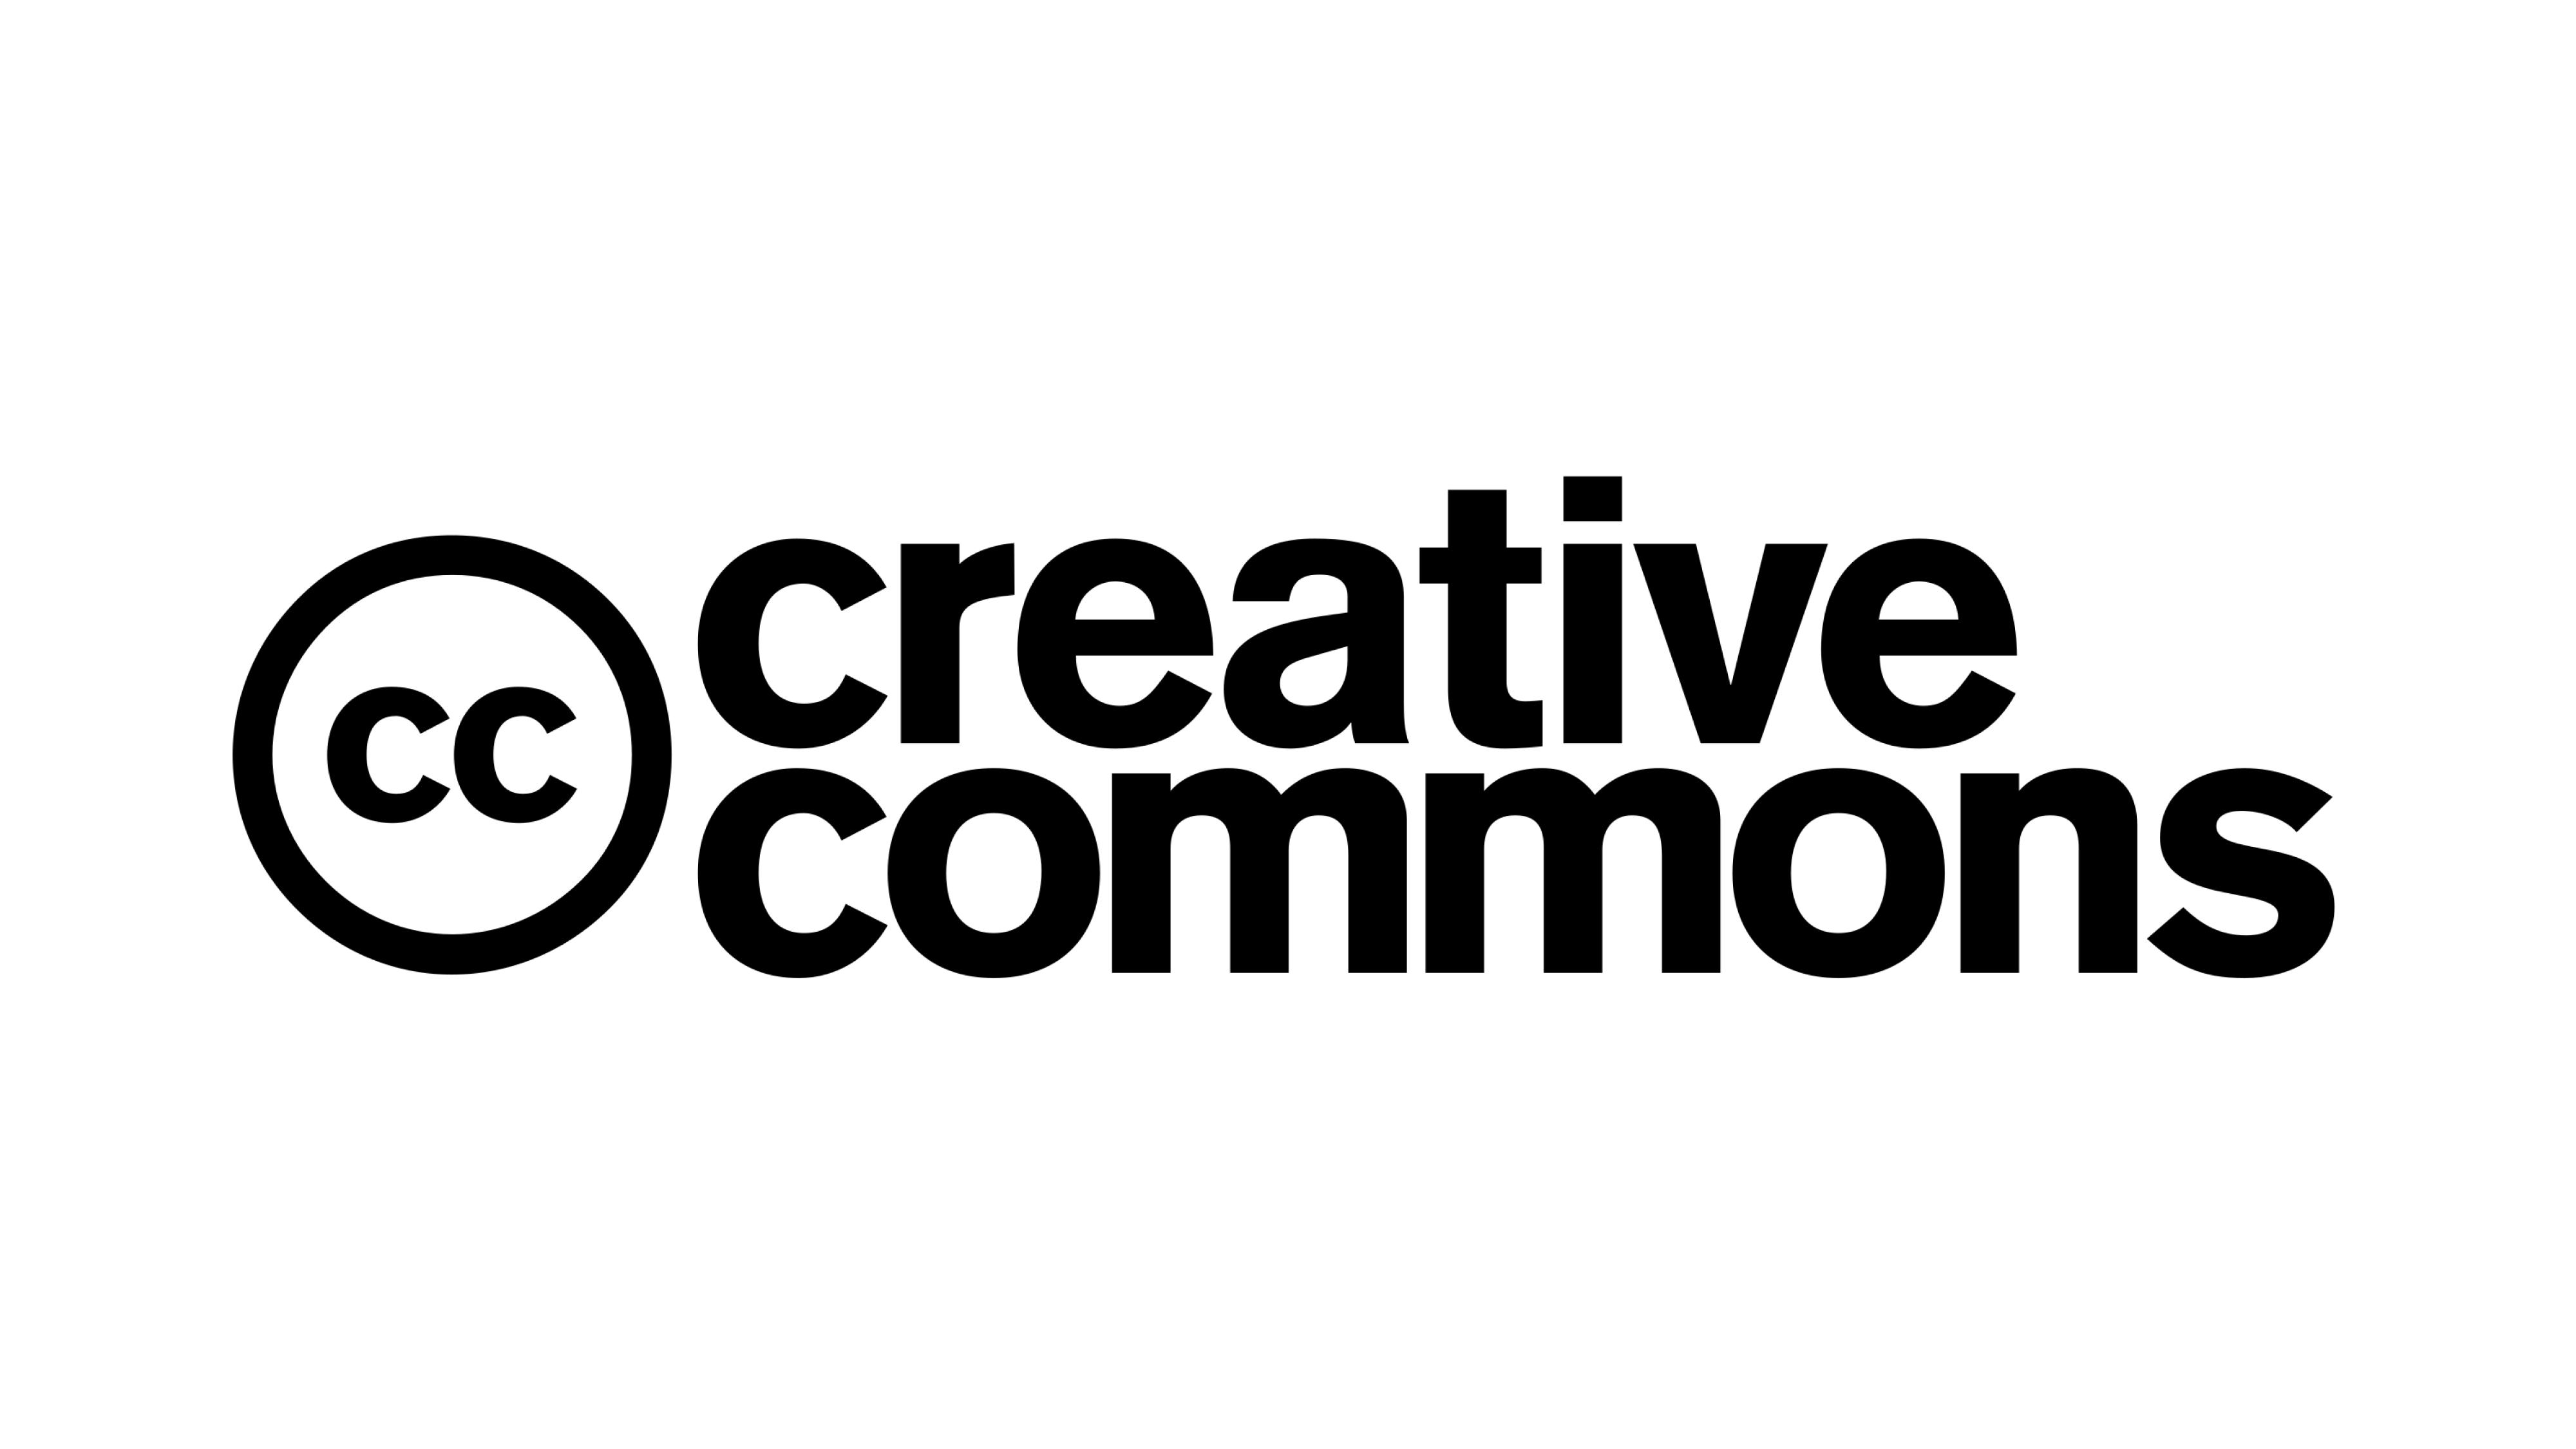 Usability Spotter #2: Creative Commons Chooses ‘Human readable’ Instead of ‘Simple Language’